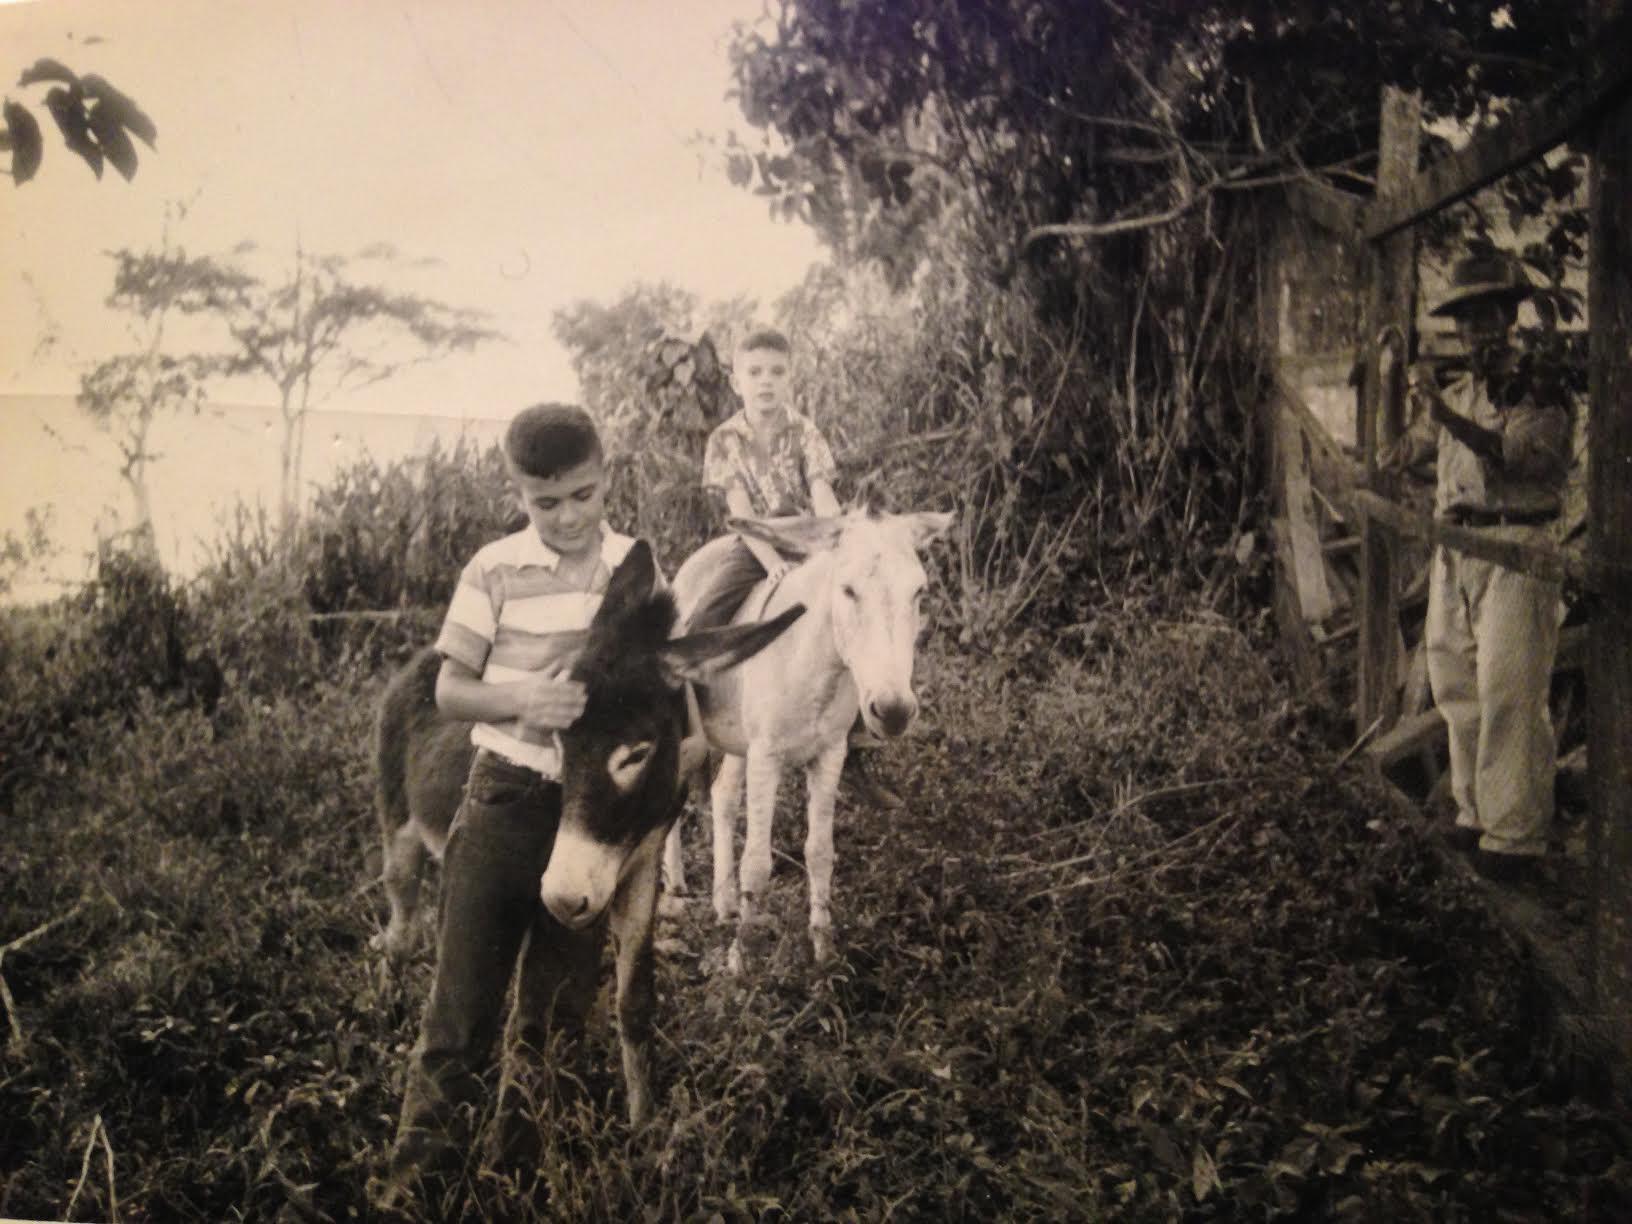 Brothers John and George Campbell ride donkeys in the forests of Segovia, Colombia.